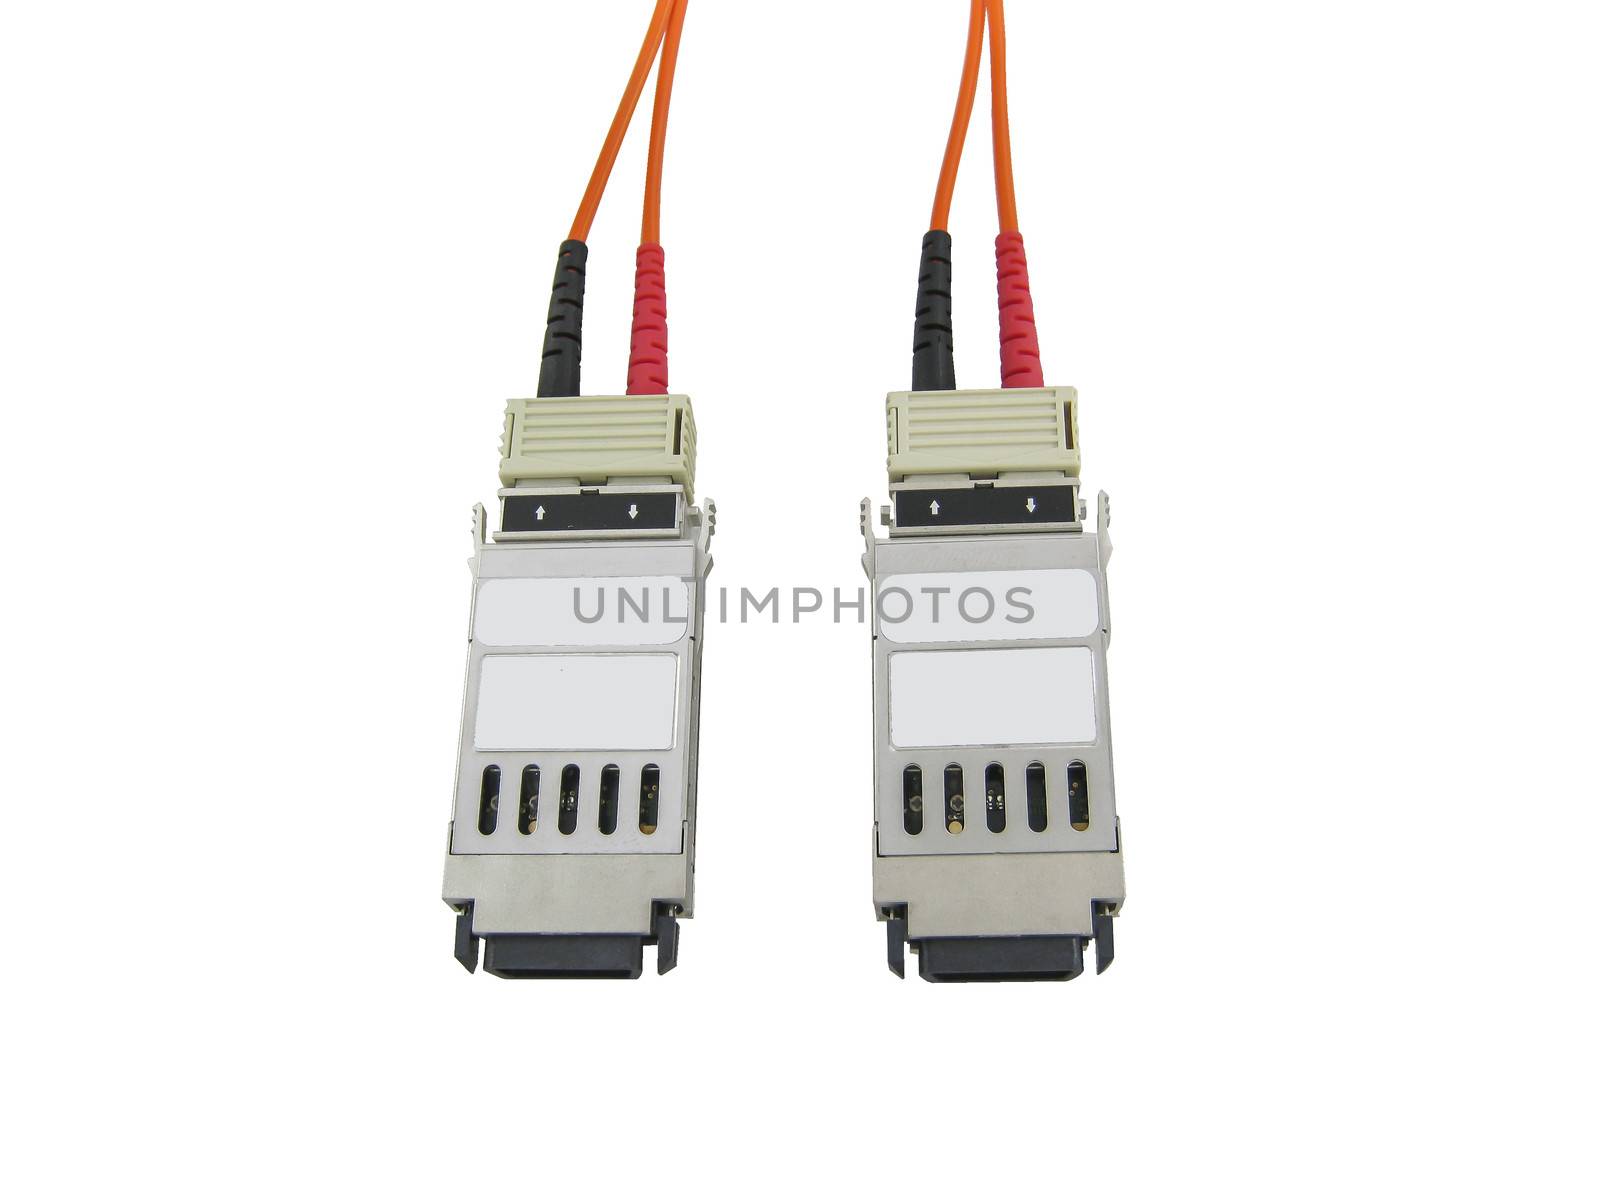 GBIC optic fiber communications equipment on the white background